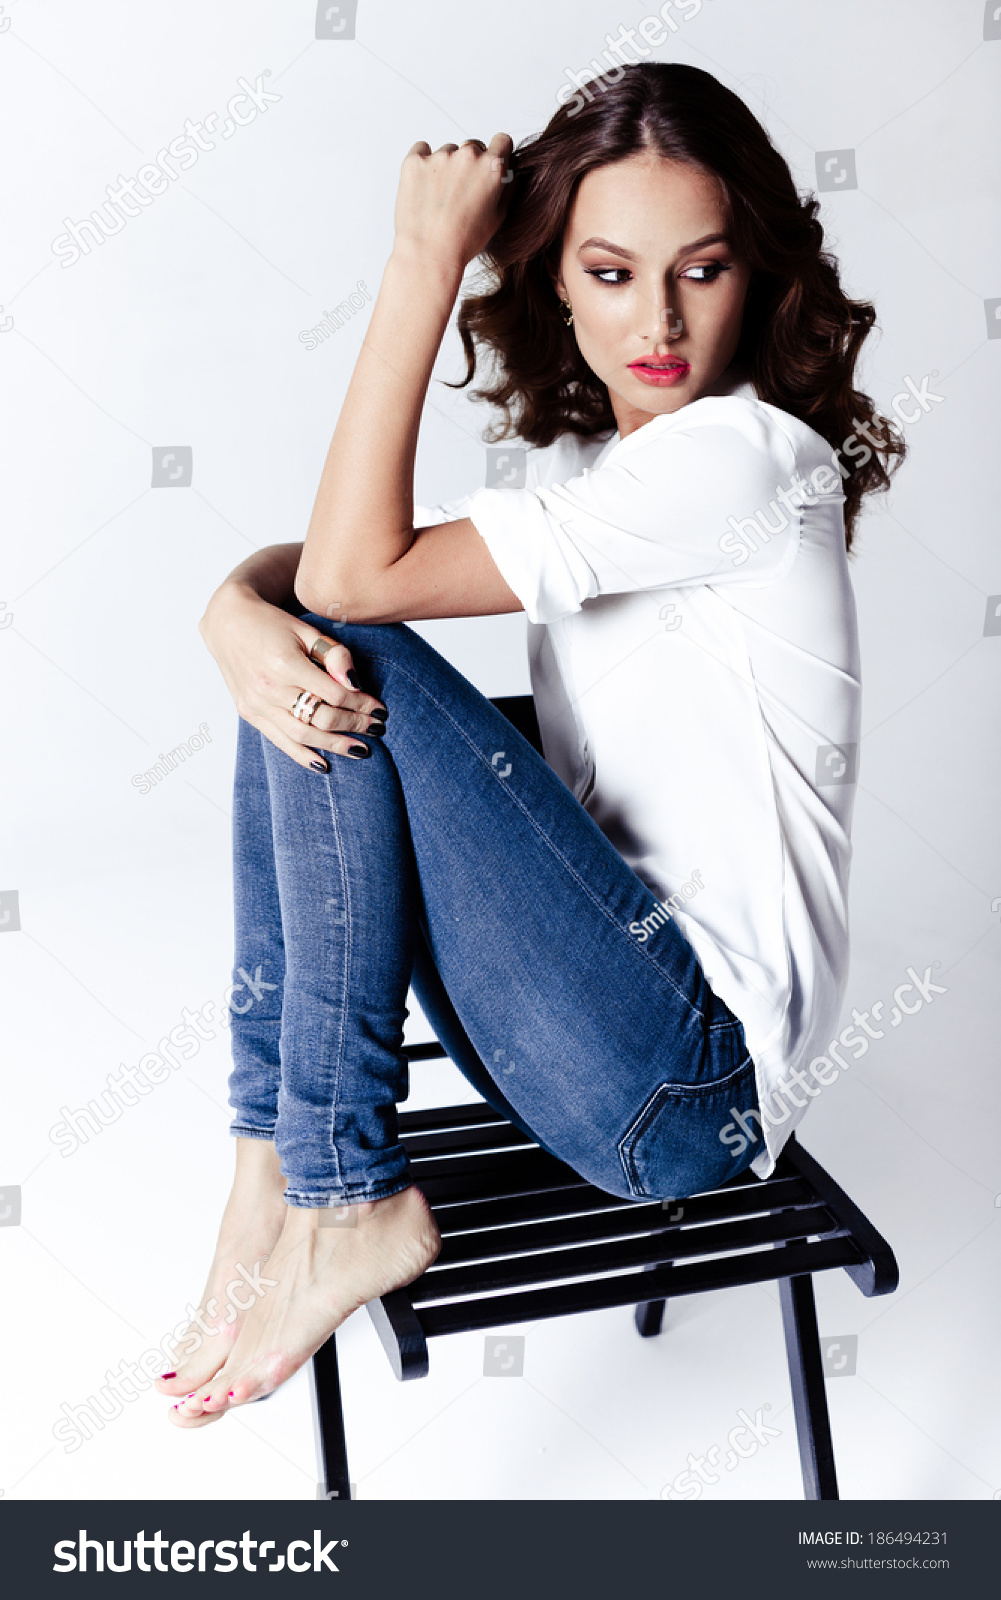 Fashion Model Sitting On A Chair In A Blouse And Jeans Barefoot On A ...